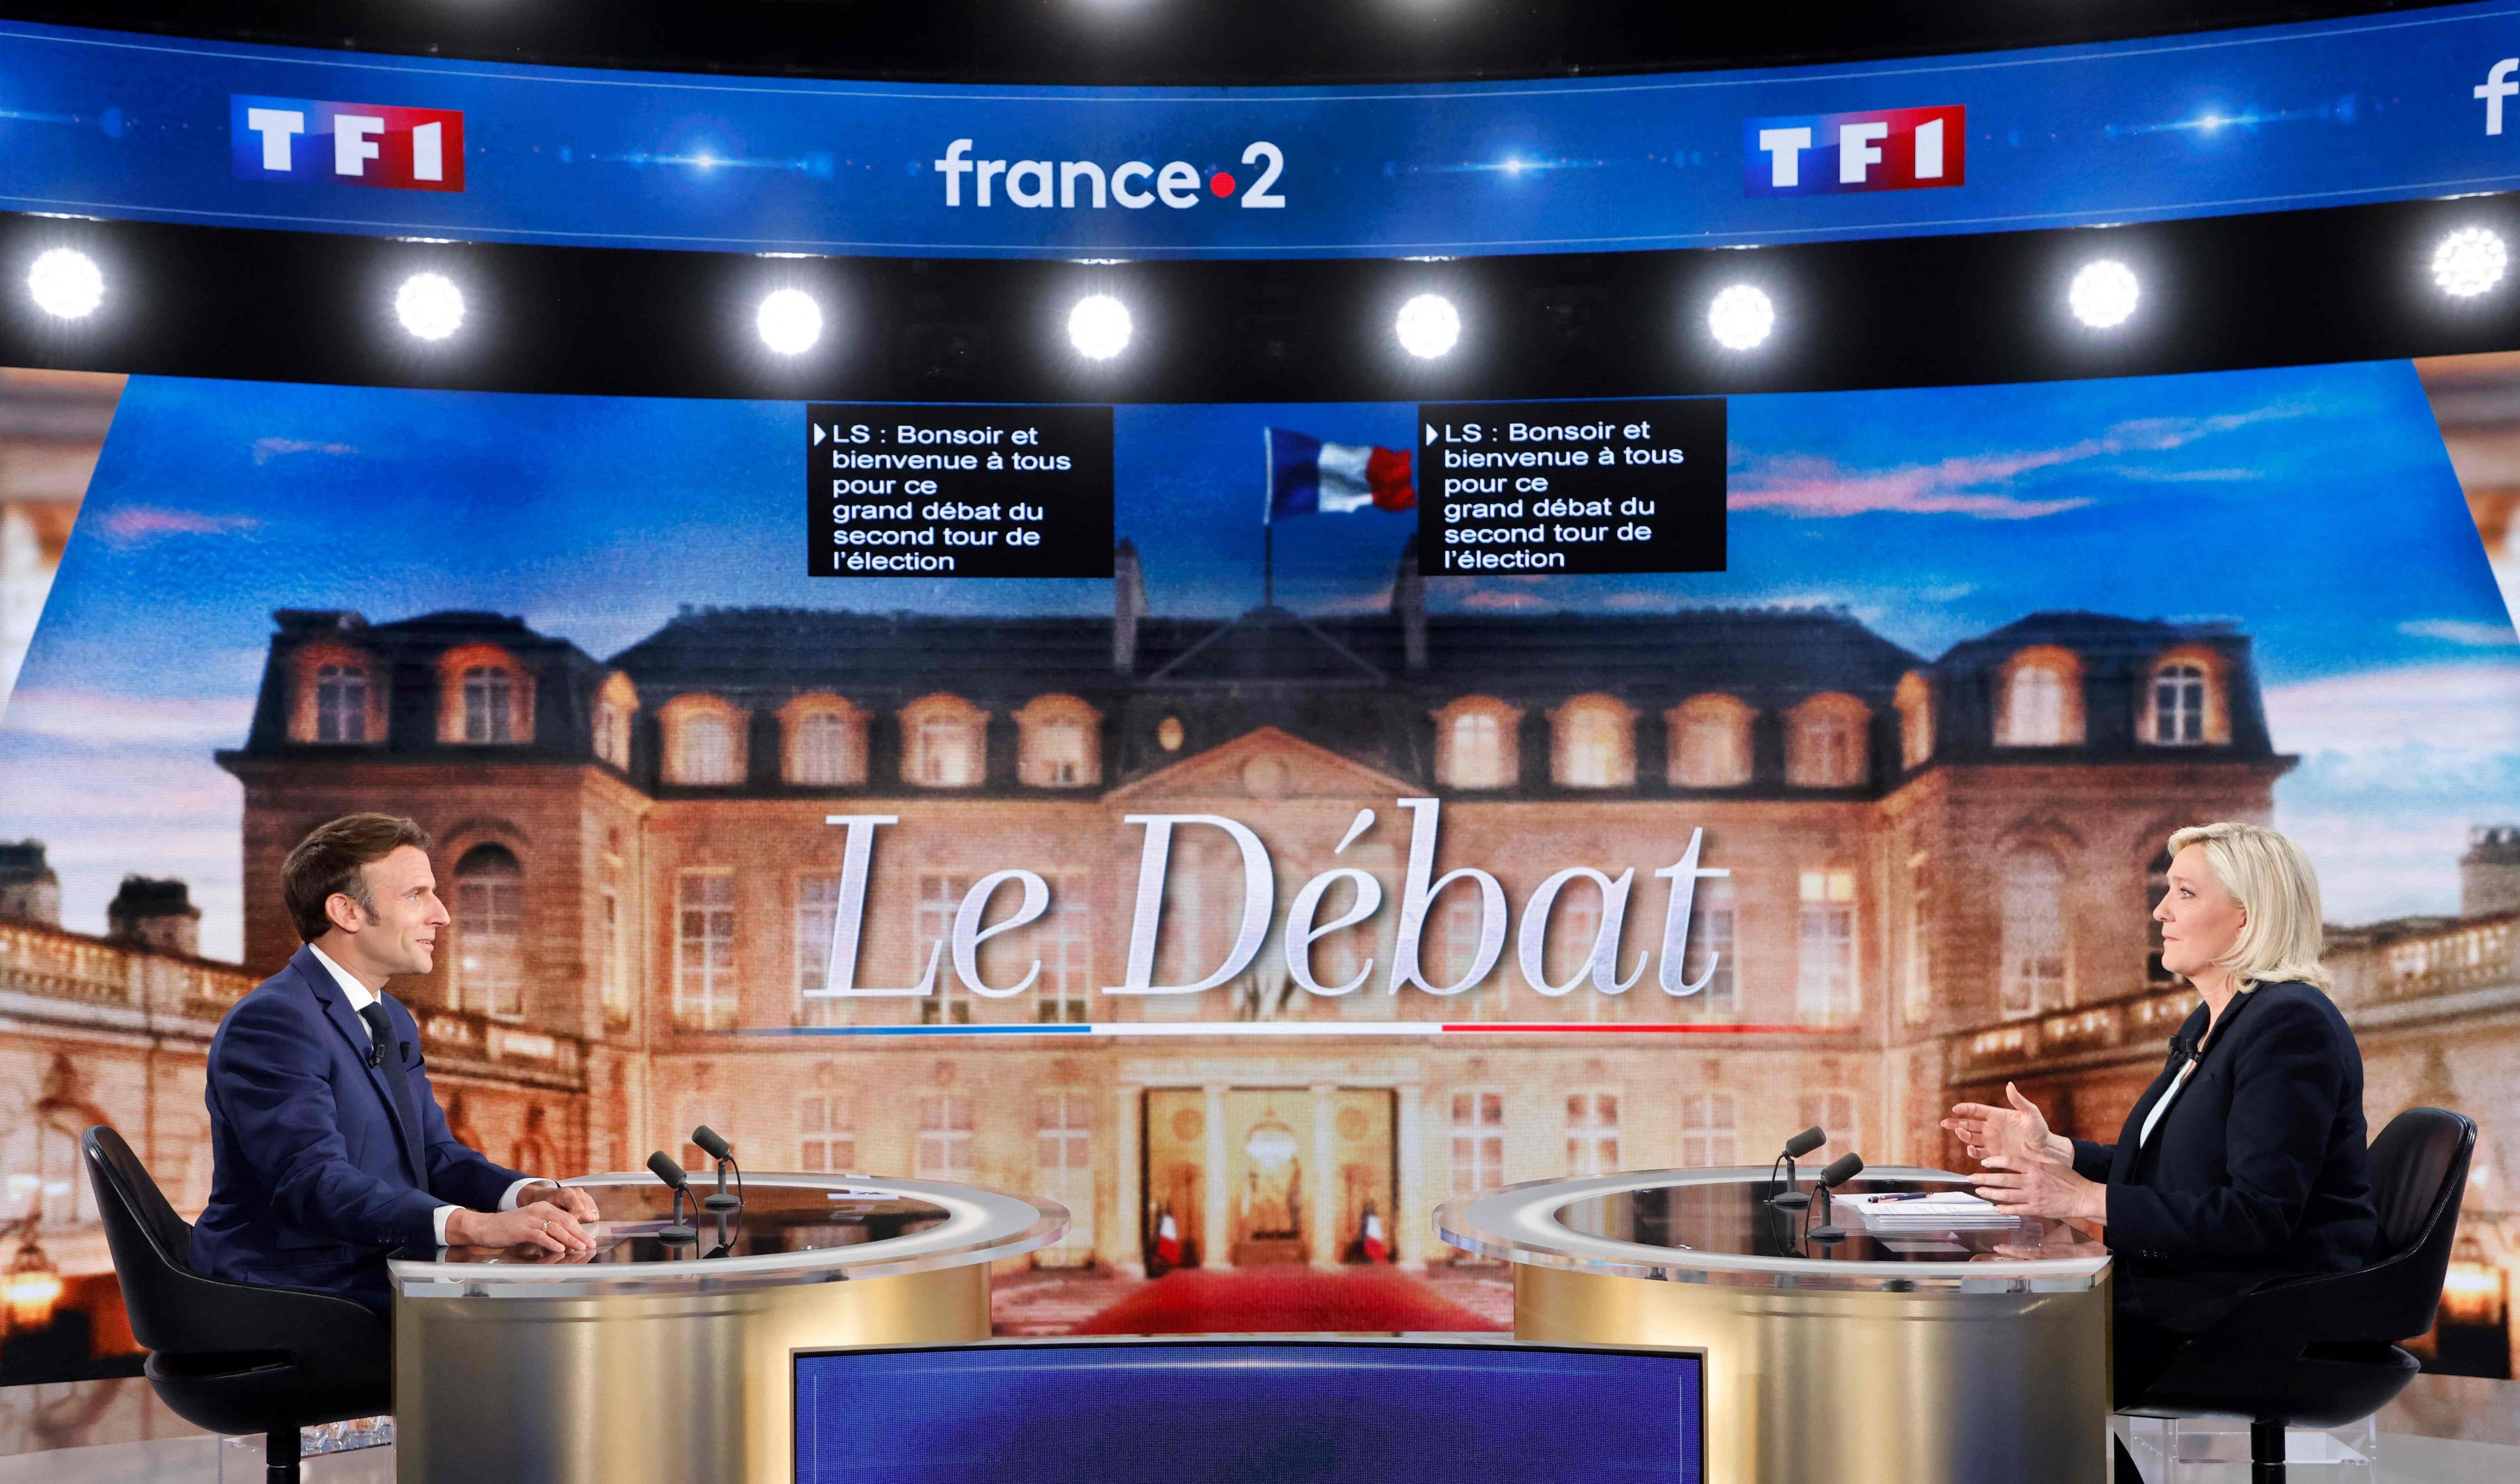 French President Emmanuel Macron and Rassemblement National candidate Marine Le Pen get ready for the start of a televised debate on French TV, in Saint-Denis on April 20. France will once again see a run-off presidential election between the centrist Macron and the far-right Le Pen. Photo: DPA